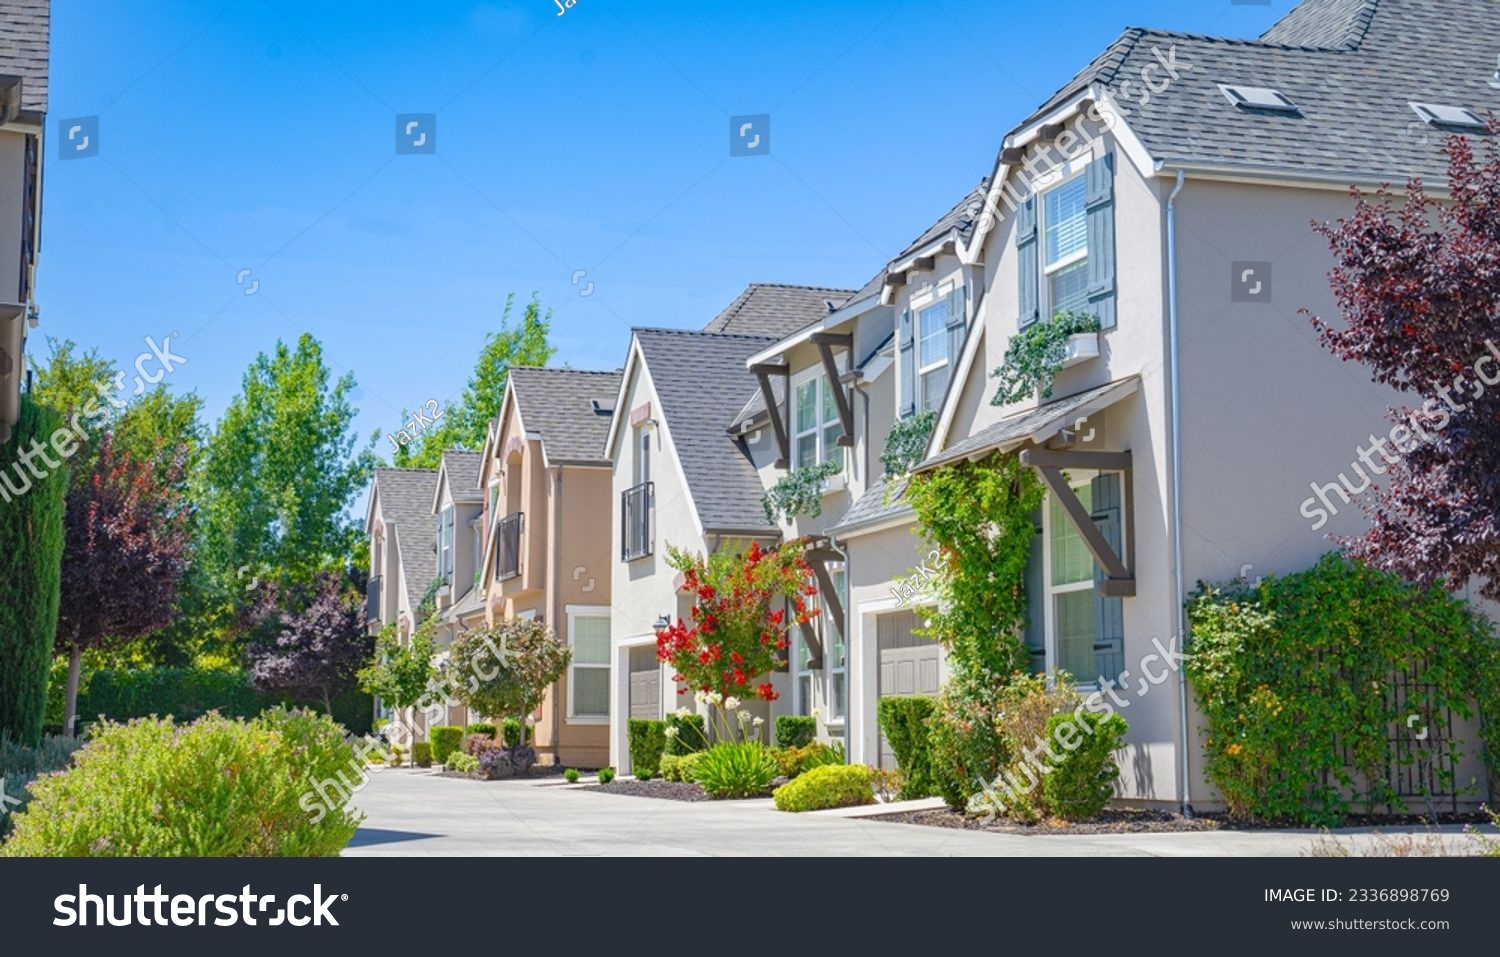 High Density Homes in Northern California #2336898769